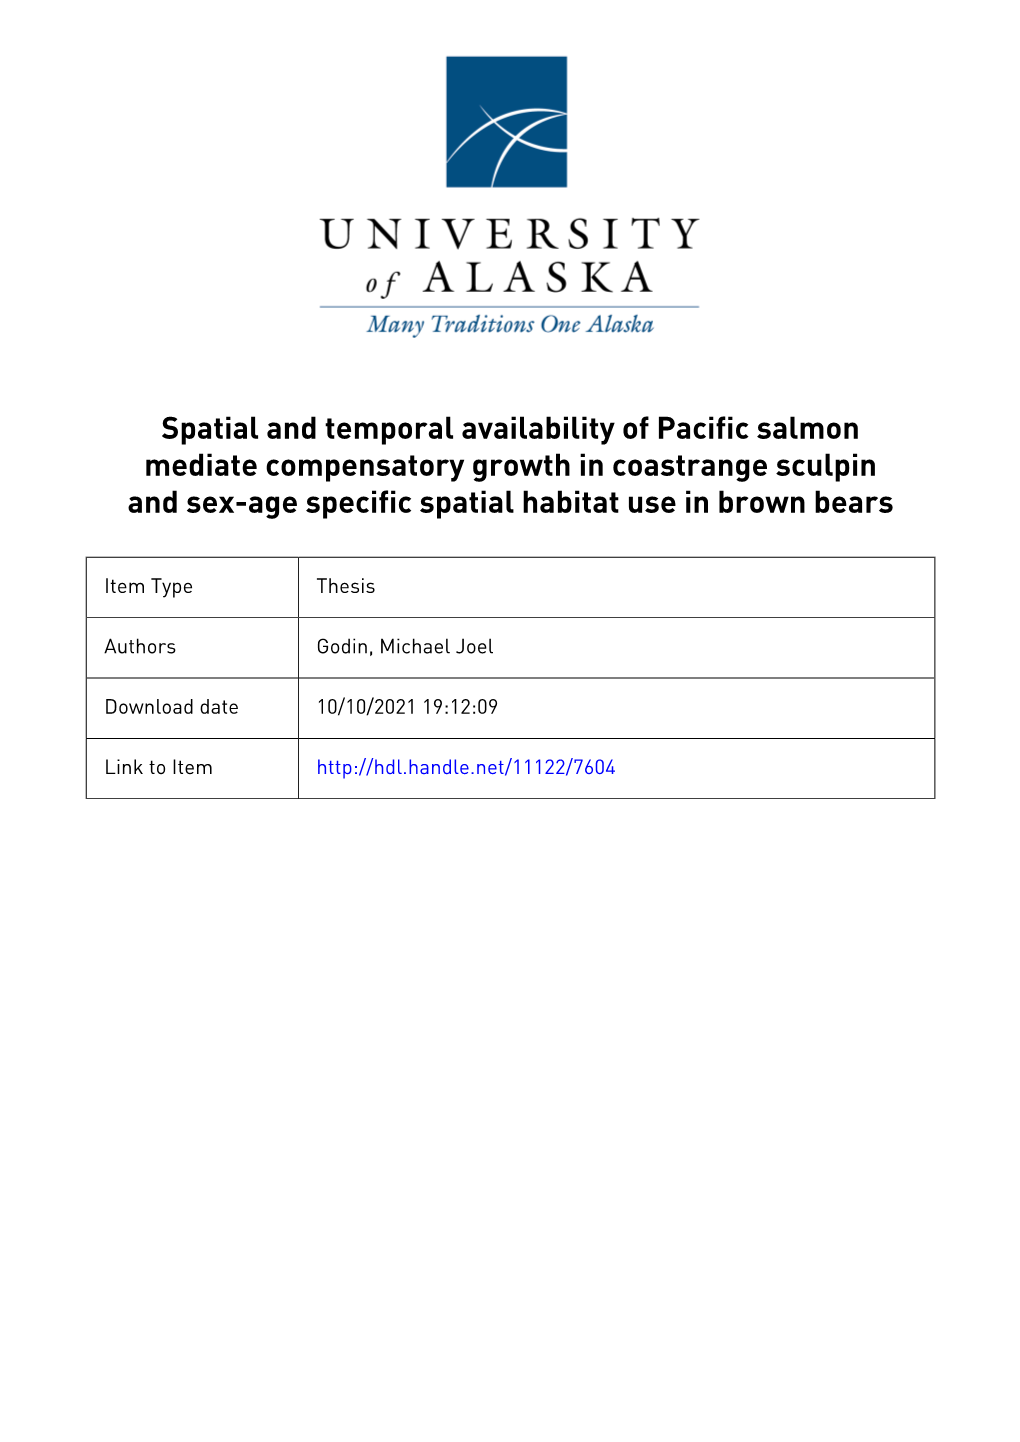 Spatial and Temporal Availability of Pacific Salmon Mediate Compensatory Growth in Coastrange Sculpin and Sex-Age Specific Spatial Habitat Use in Brown Bears